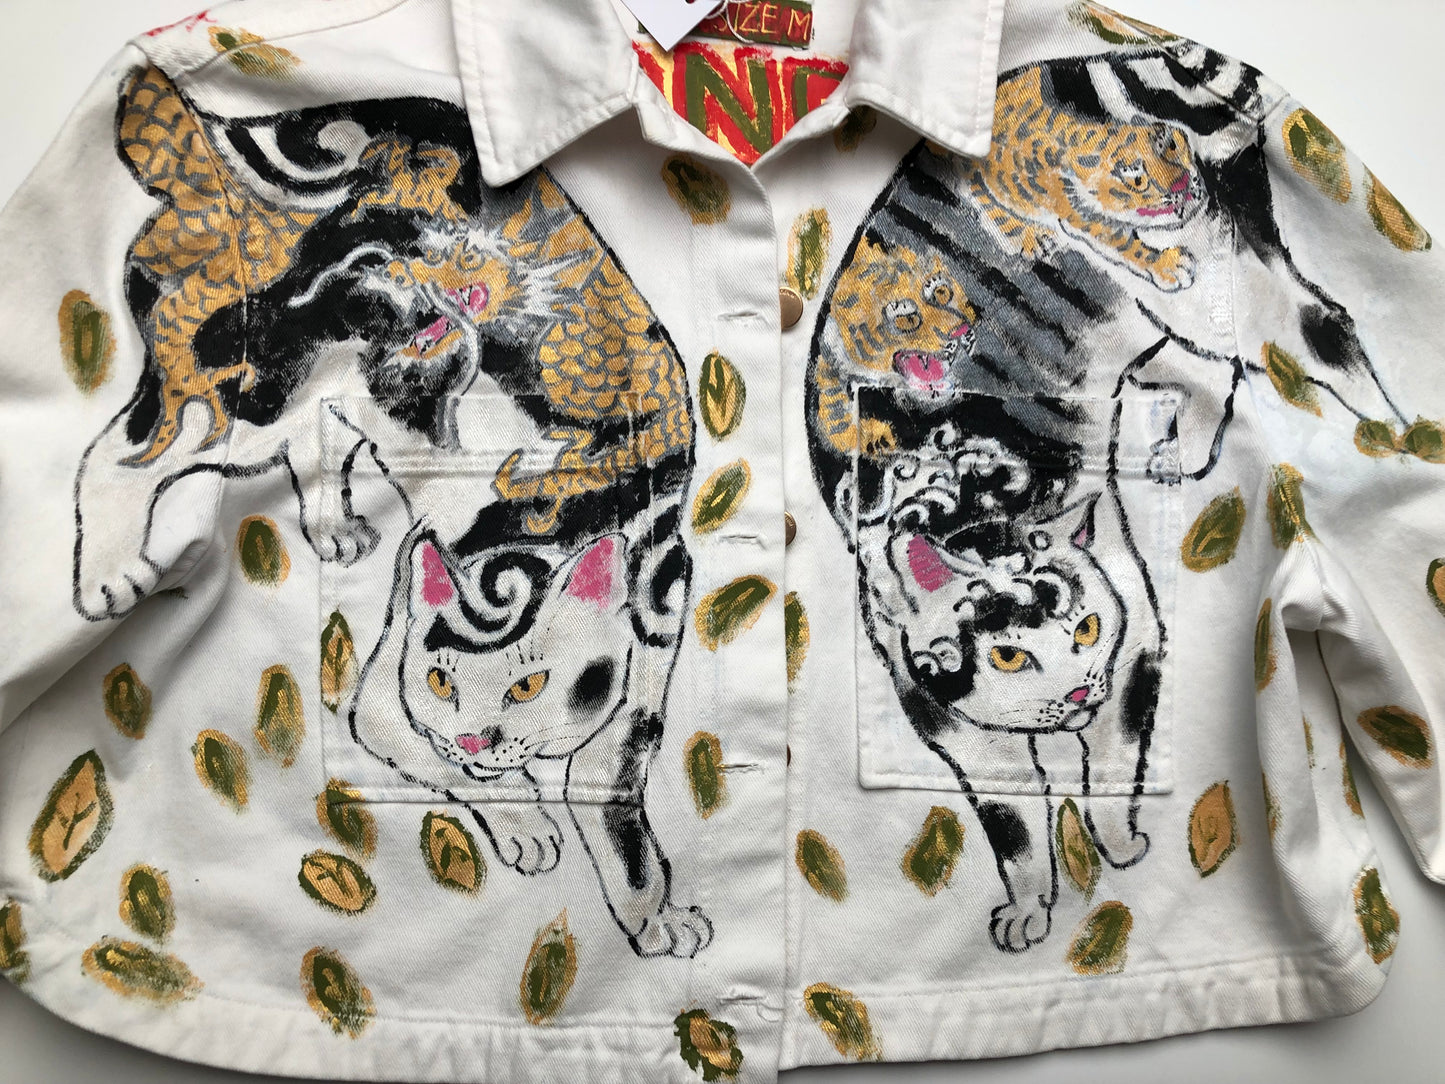 Cats in detail on a white women's denim jacket